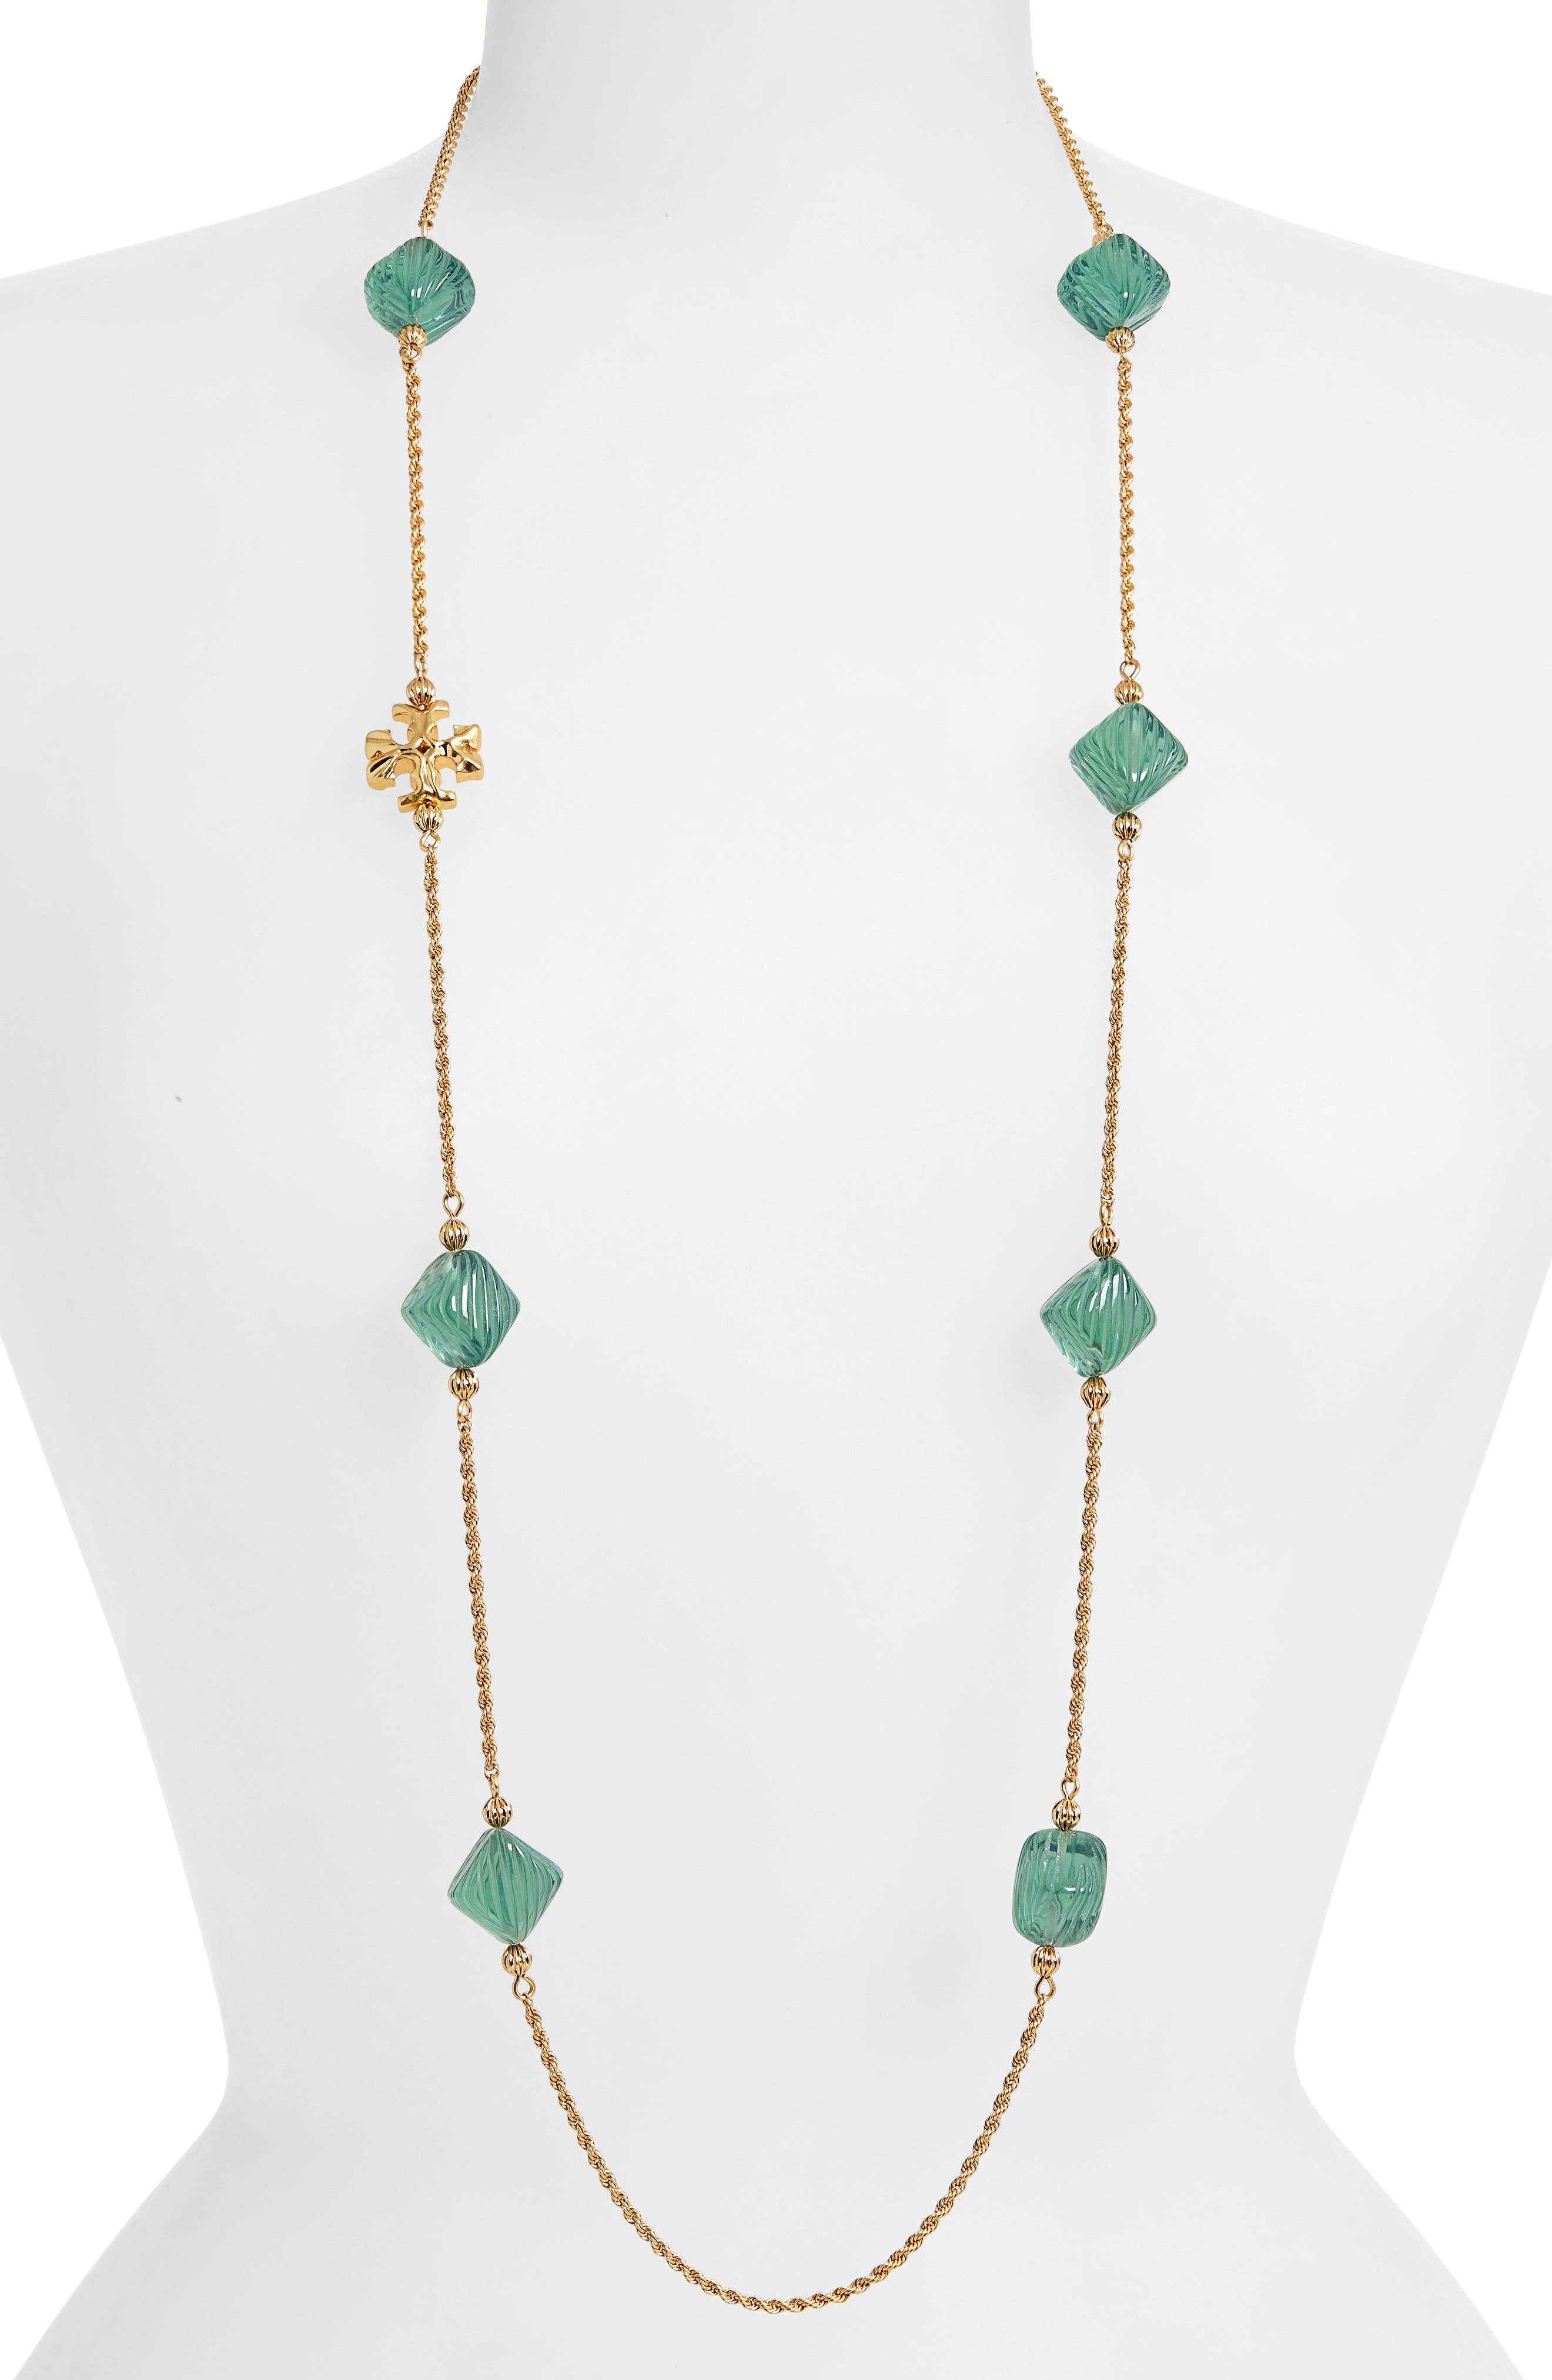 Tory Burch Roxanne Necklace in Rolled Brass /Azure Green